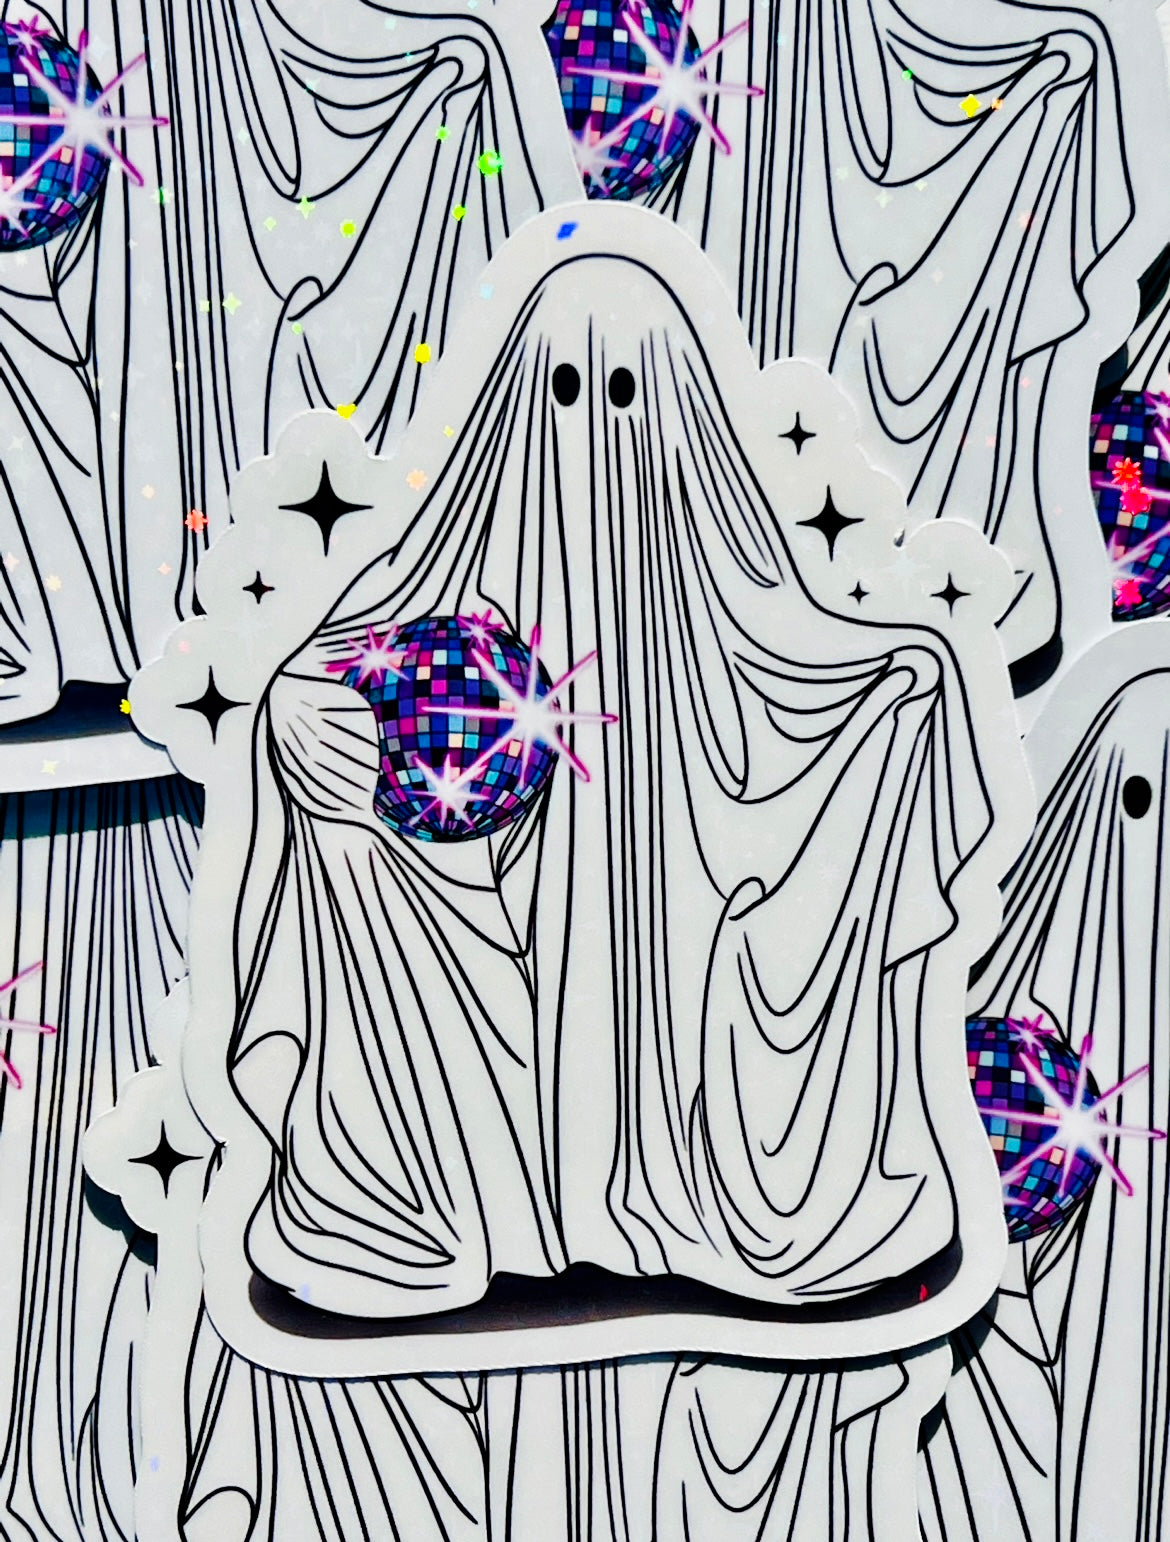 Party Ghost Sticker